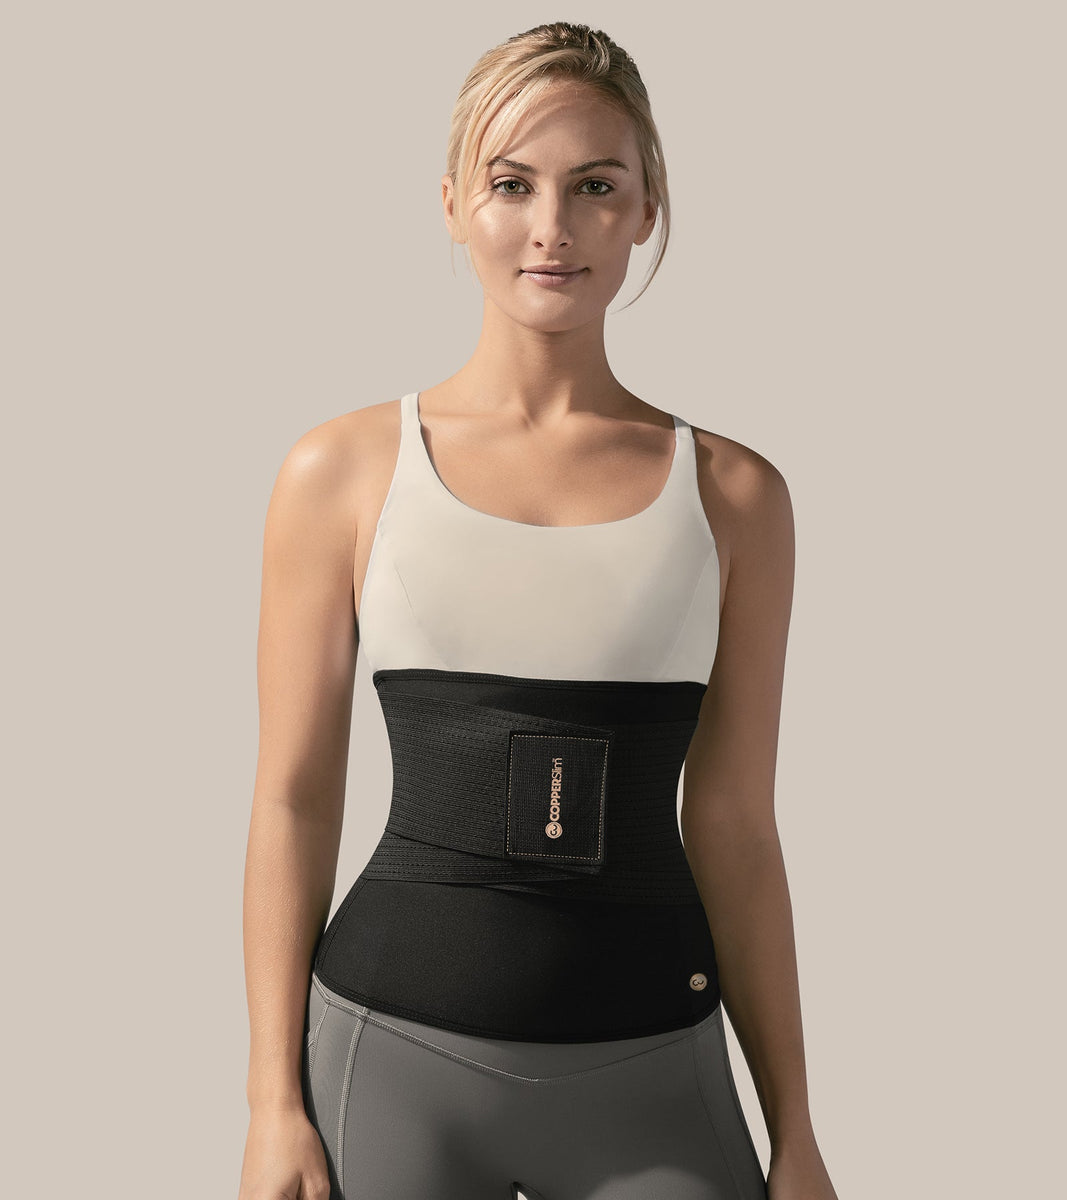 Find Cheap, Fashionable and Slimming hot belt shaper reviews